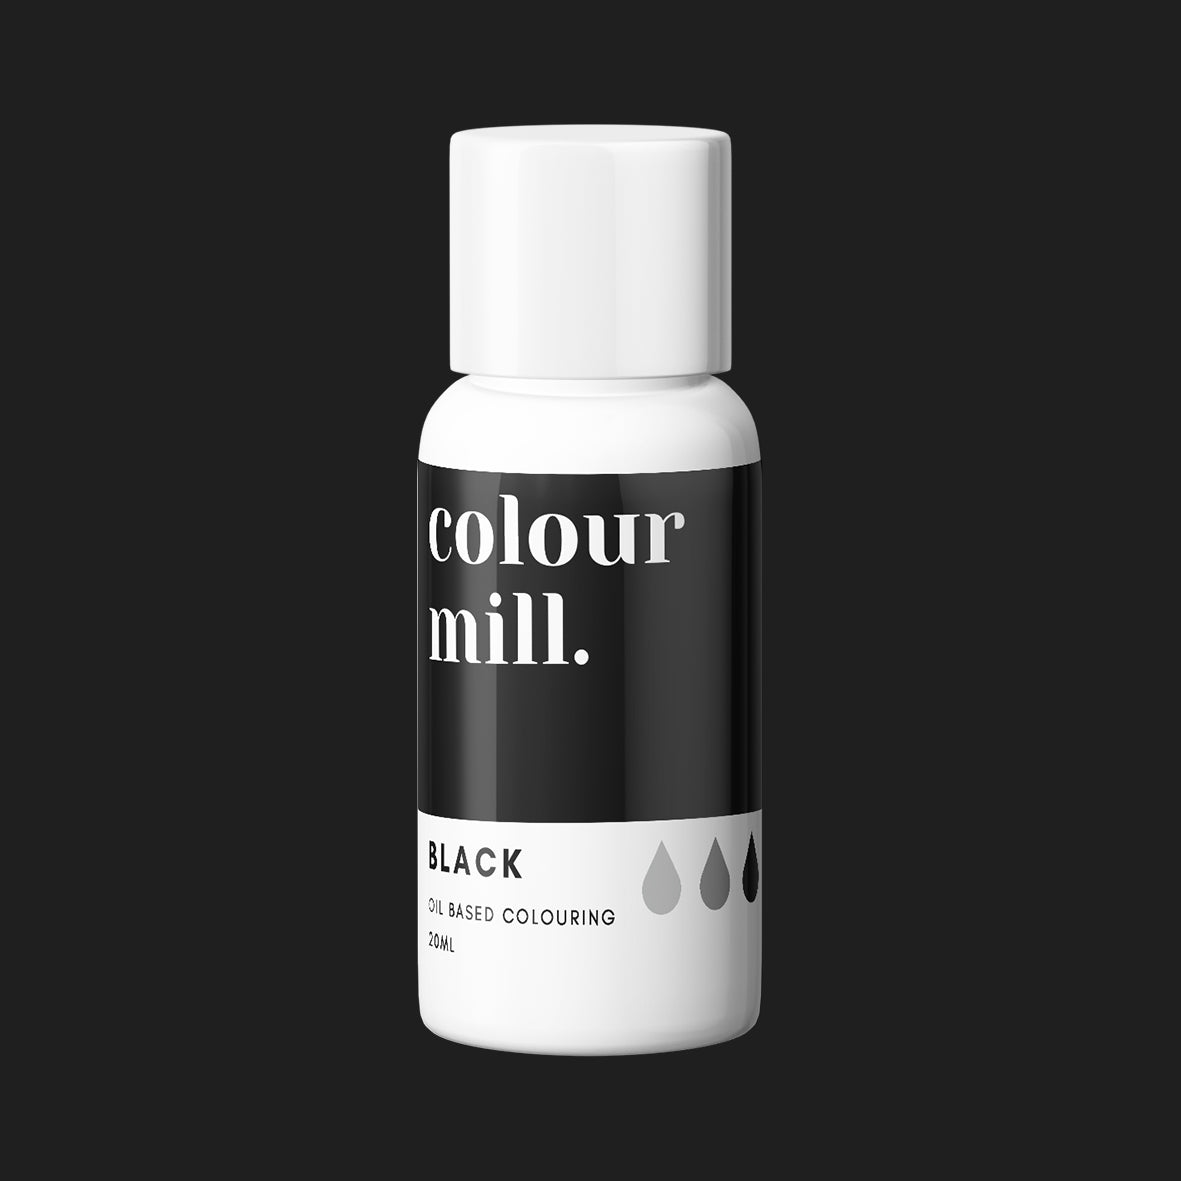 BLACK oil based concentrated icing colouring 20ml